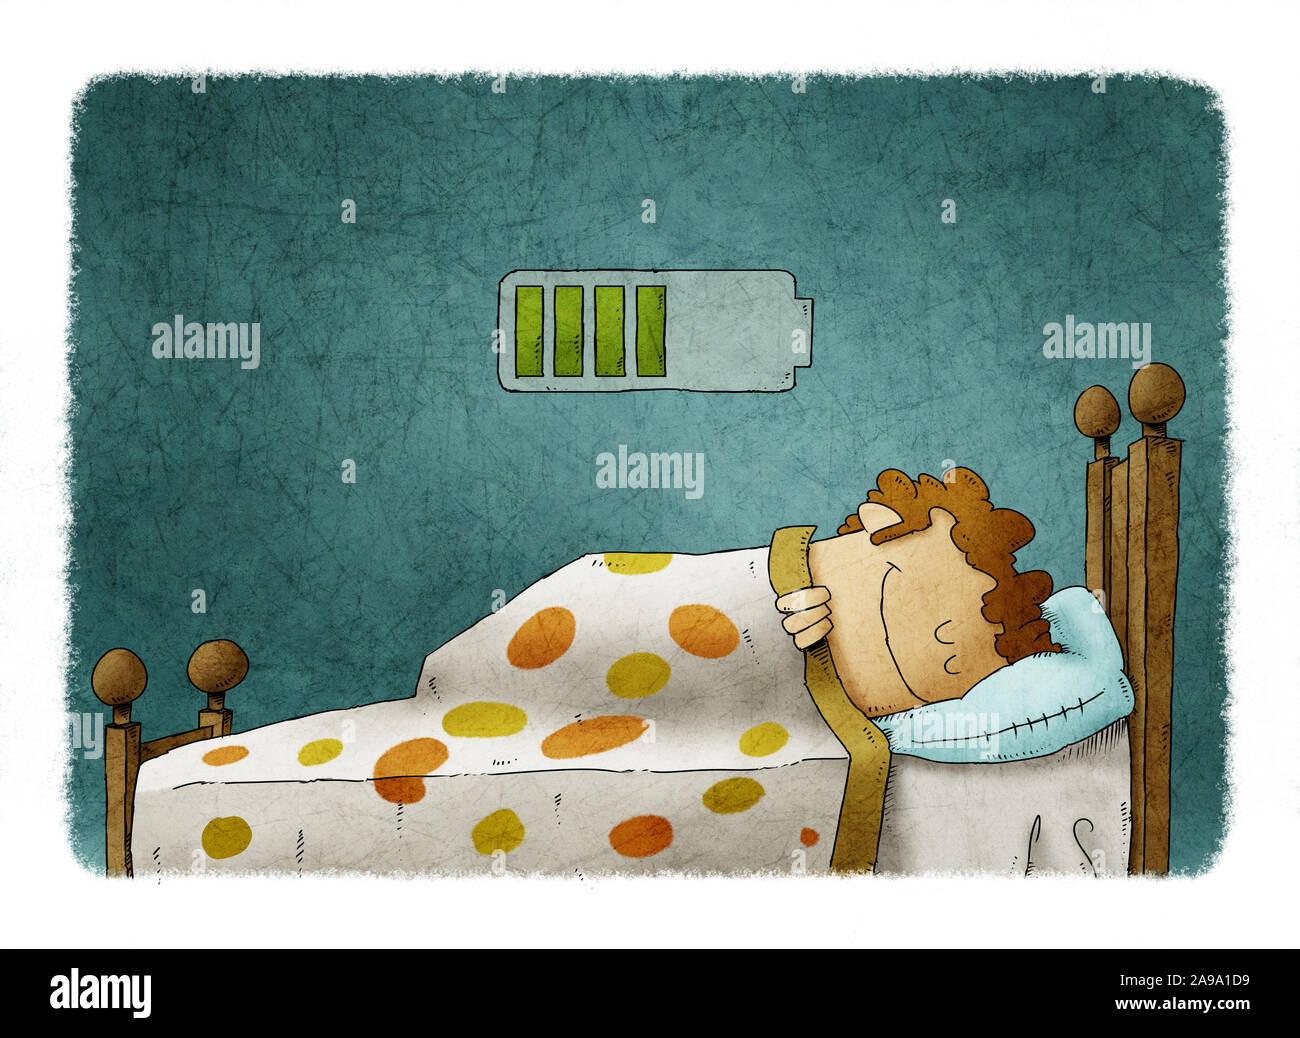 man sleeping at home and charging battery, health concept Stock Photo